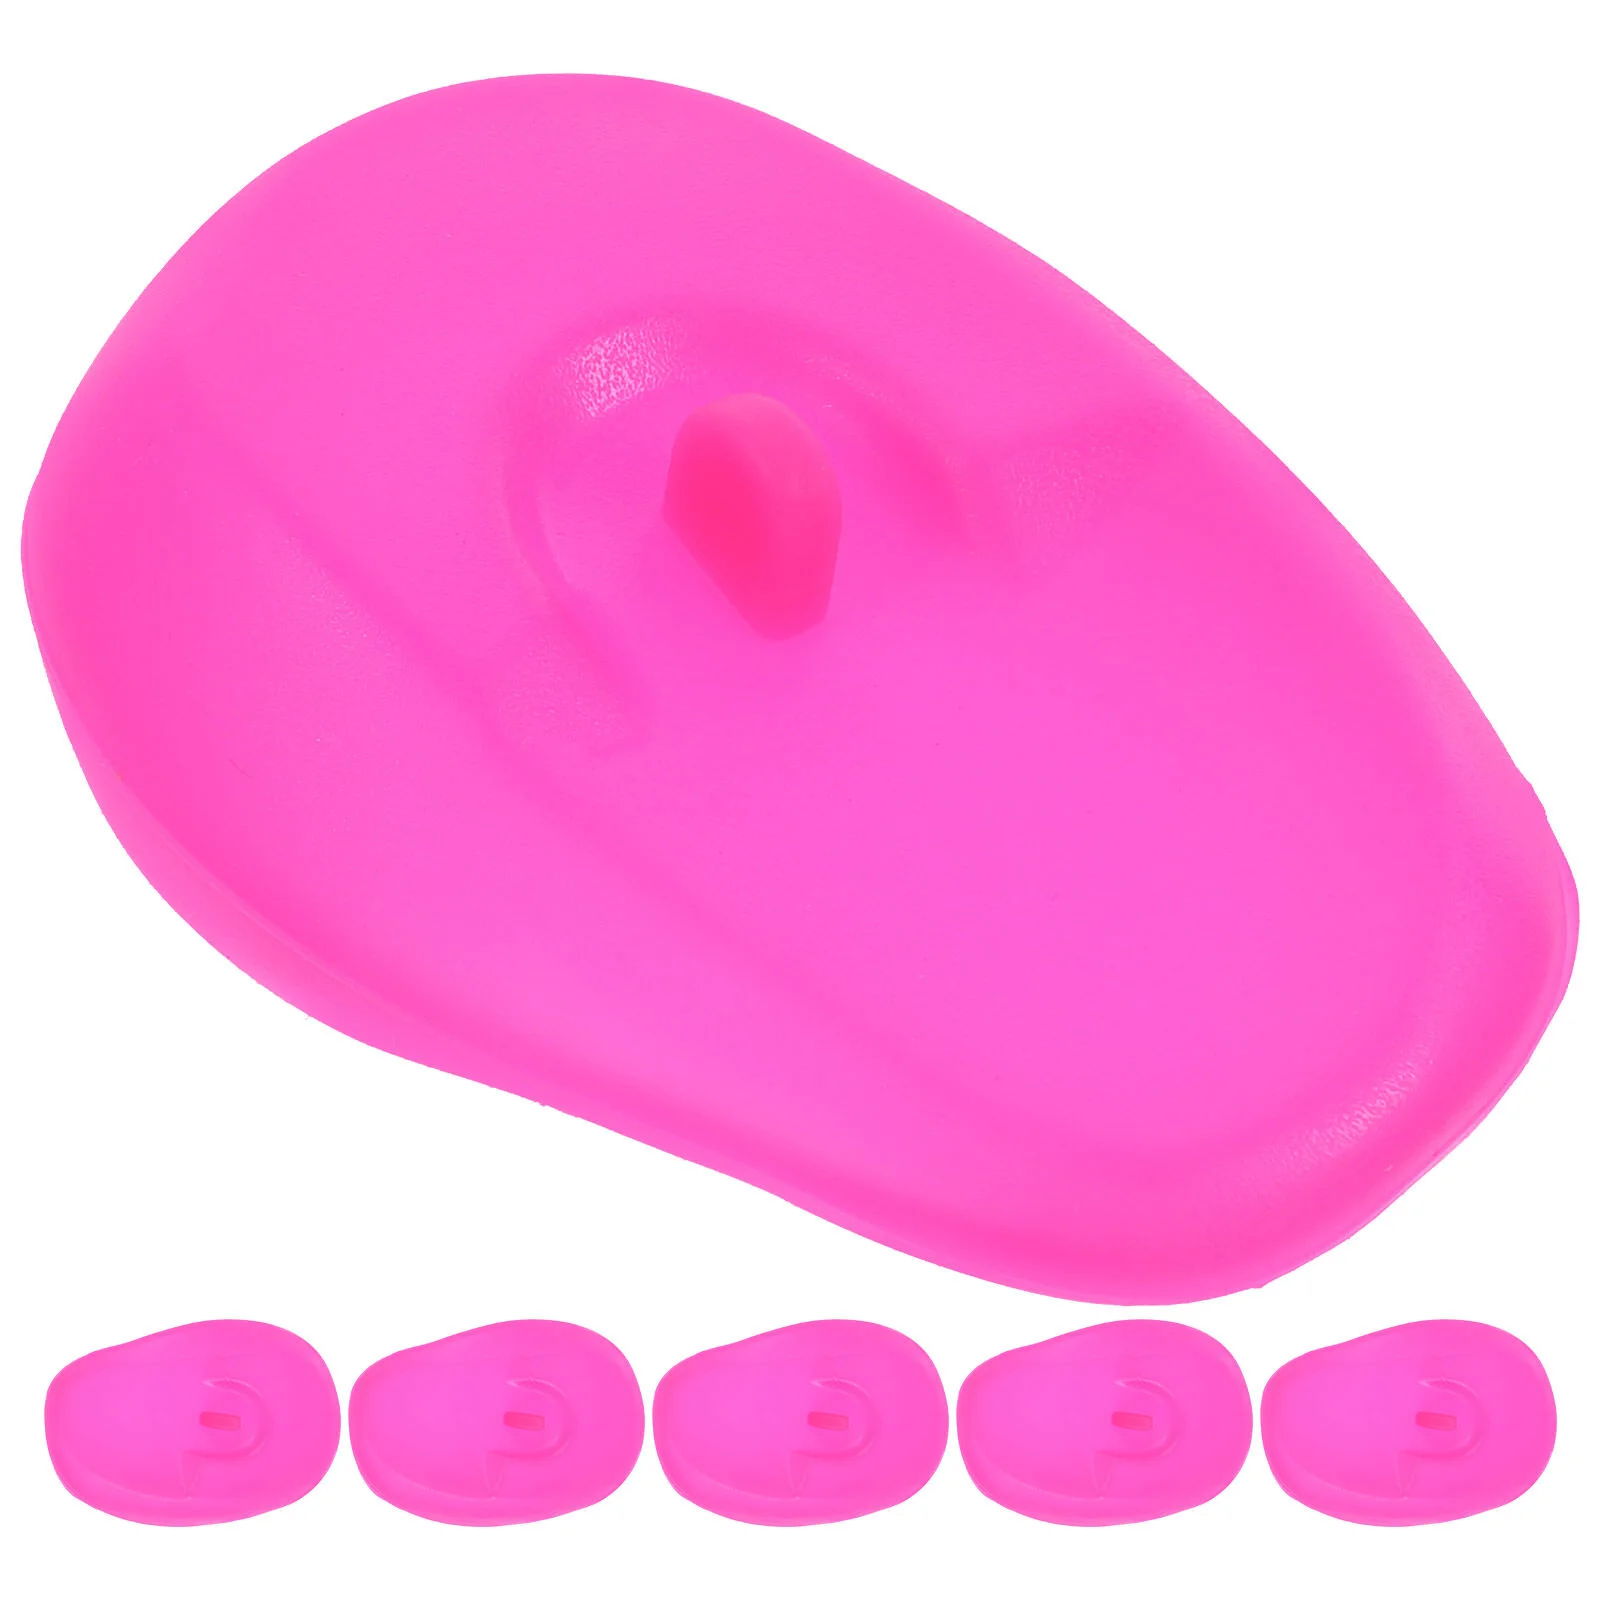 

Hair Dye Silicone Hairdressing Earmuffs Coloring Protectors Dyeing Covers Dryer